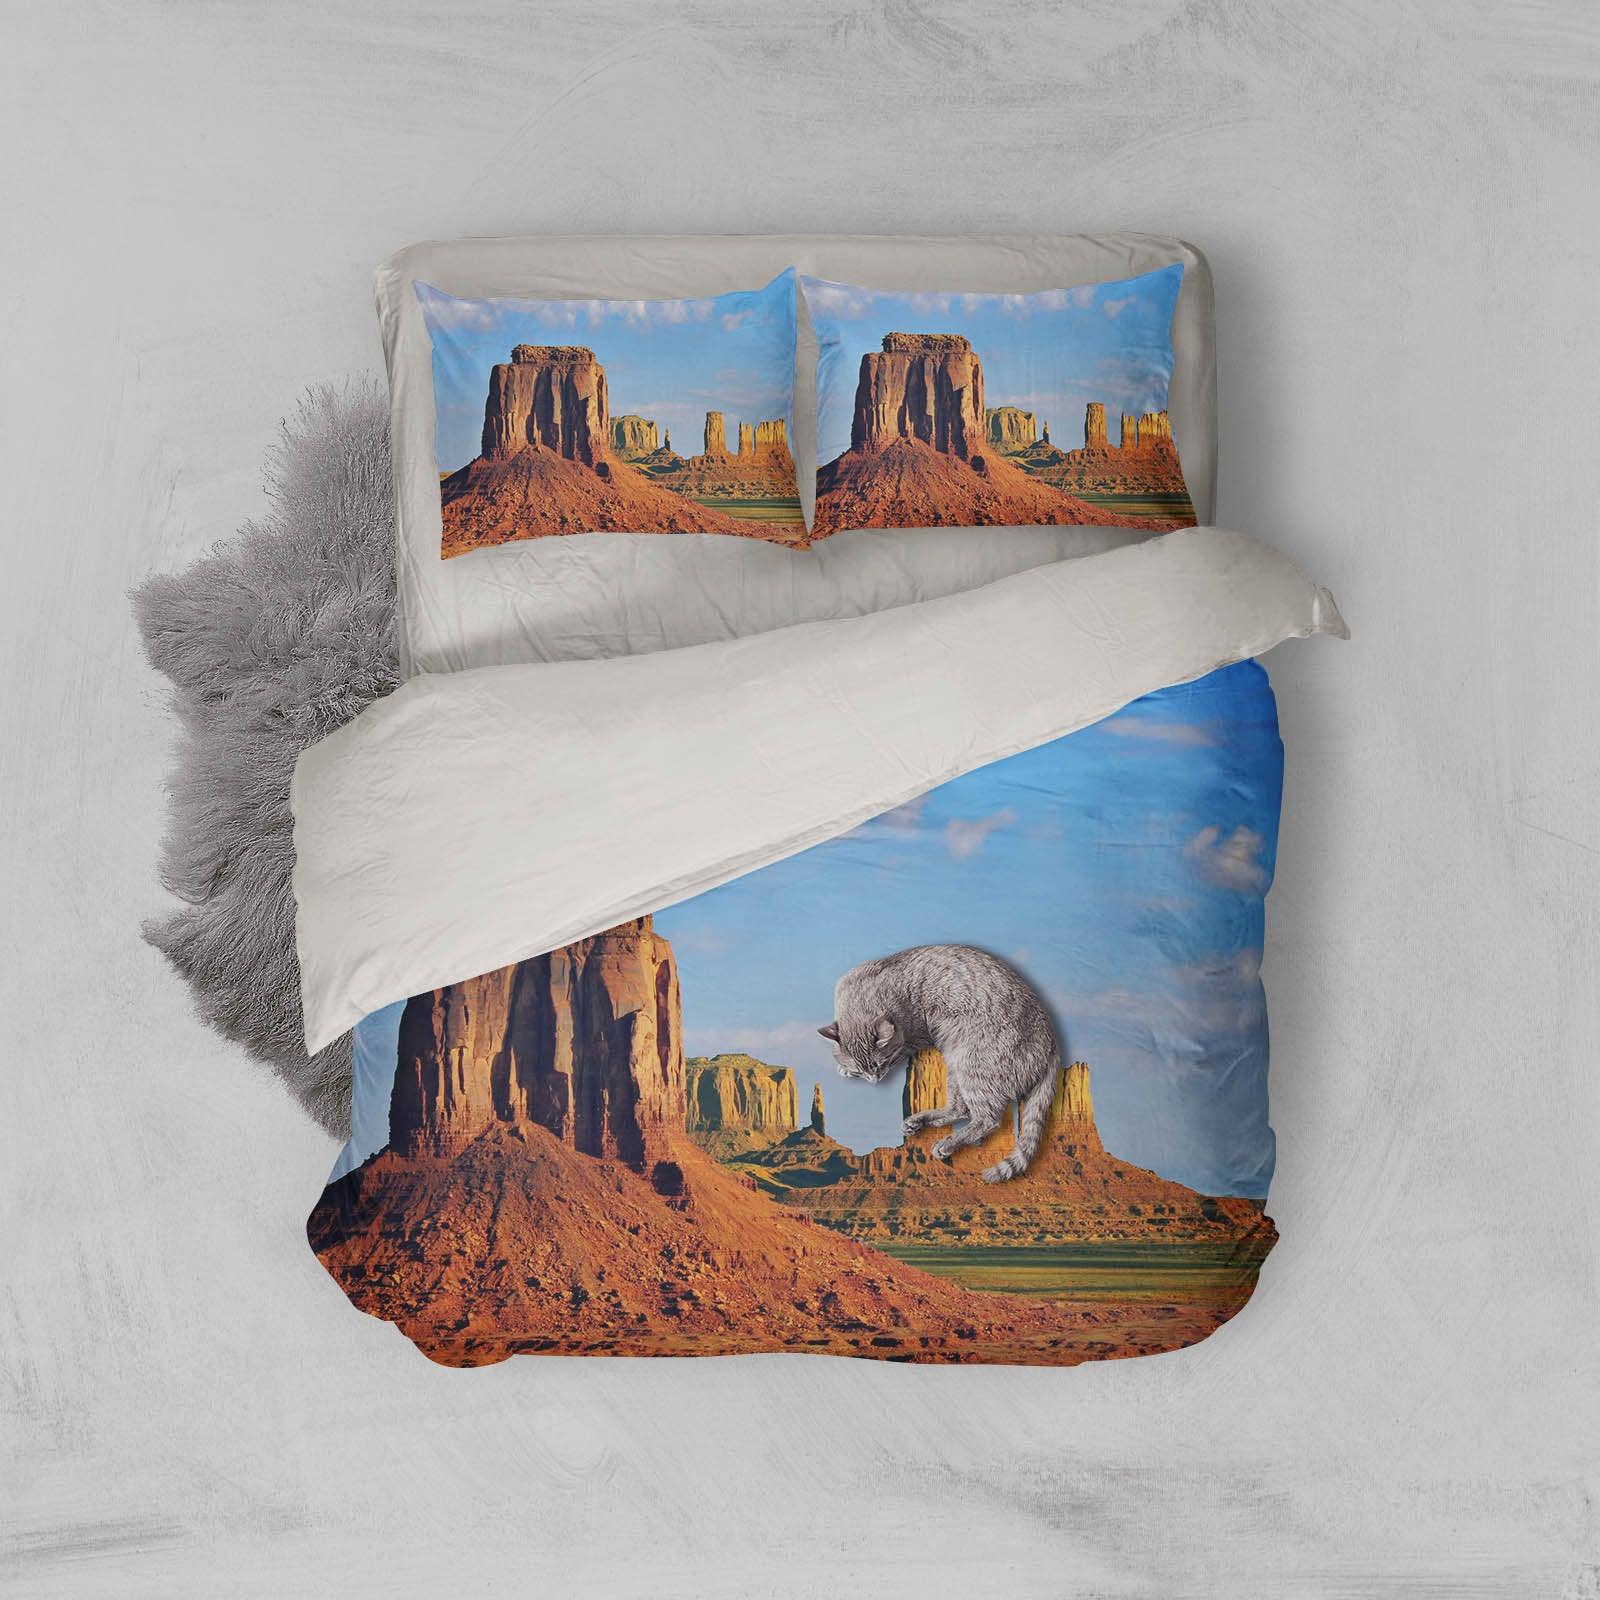 3D Spectacular, Natural scenery Bedding Set Quilt Cover Quilt Duvet Cover ,Pillowcases Personalized  Bedding,Queen, King ,Full, Double 3 Pcs- Jess Art Decoration